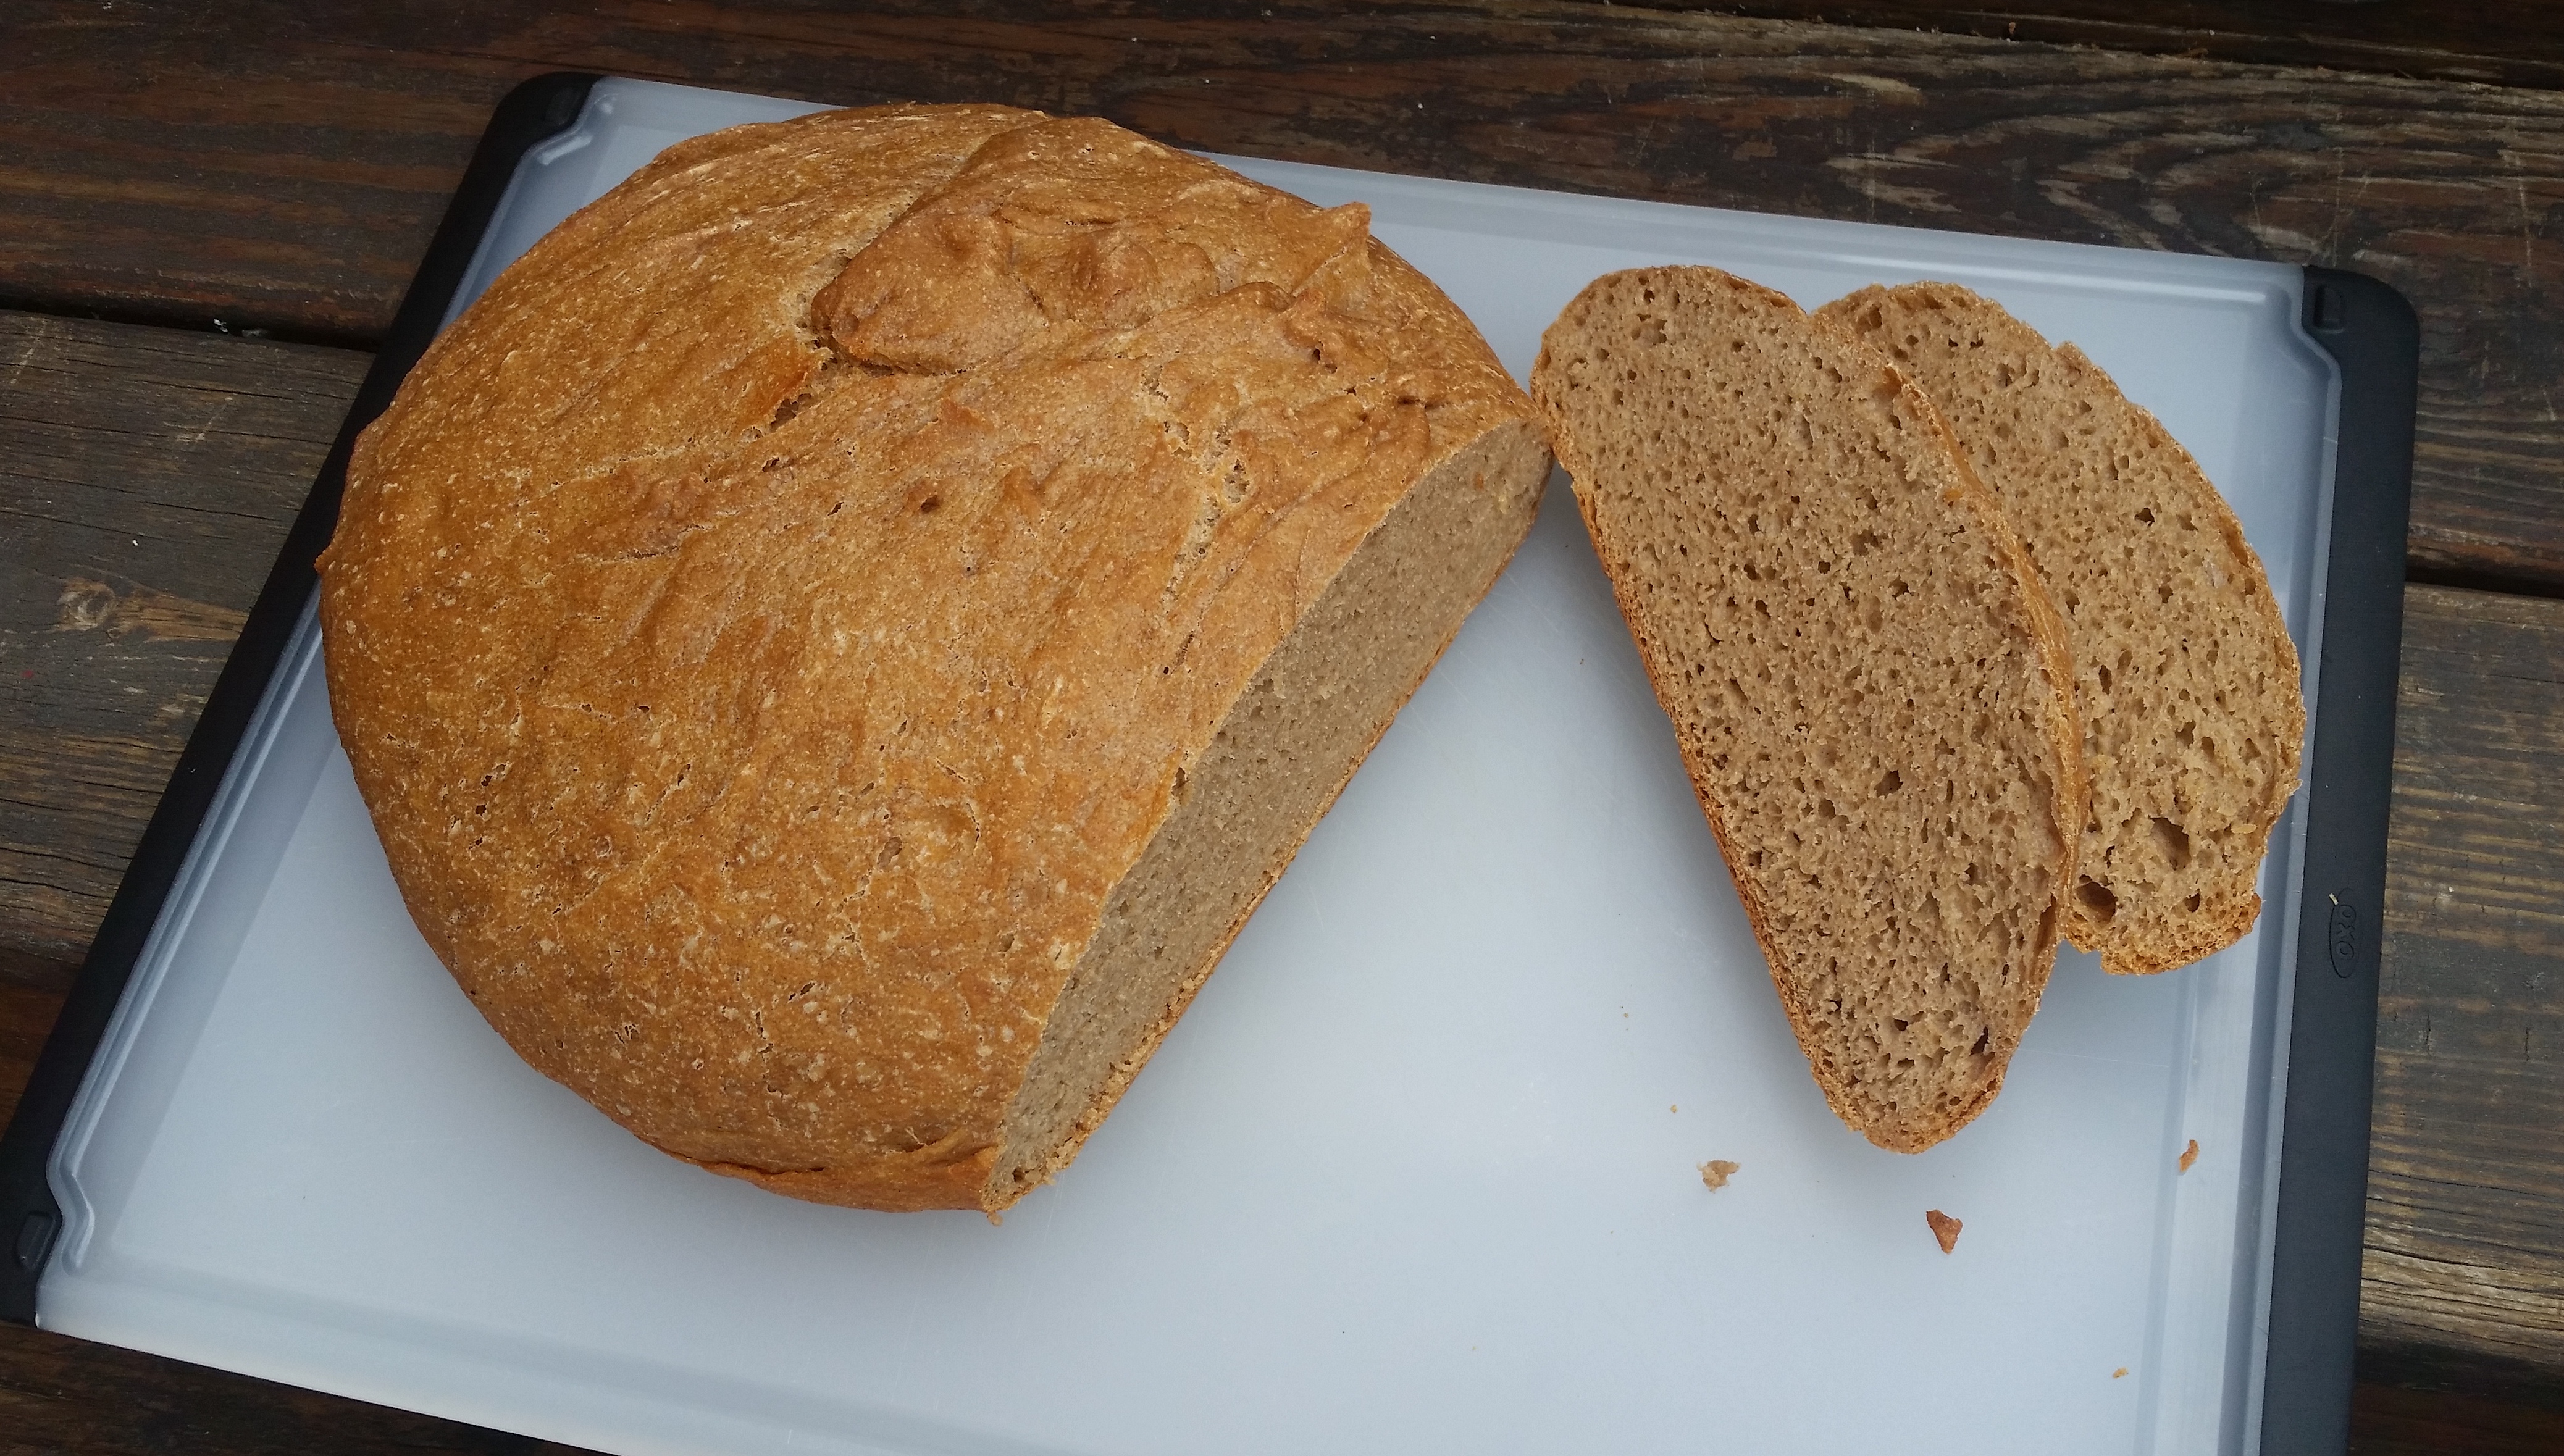 100% Sprouted Whole Wheat Bread